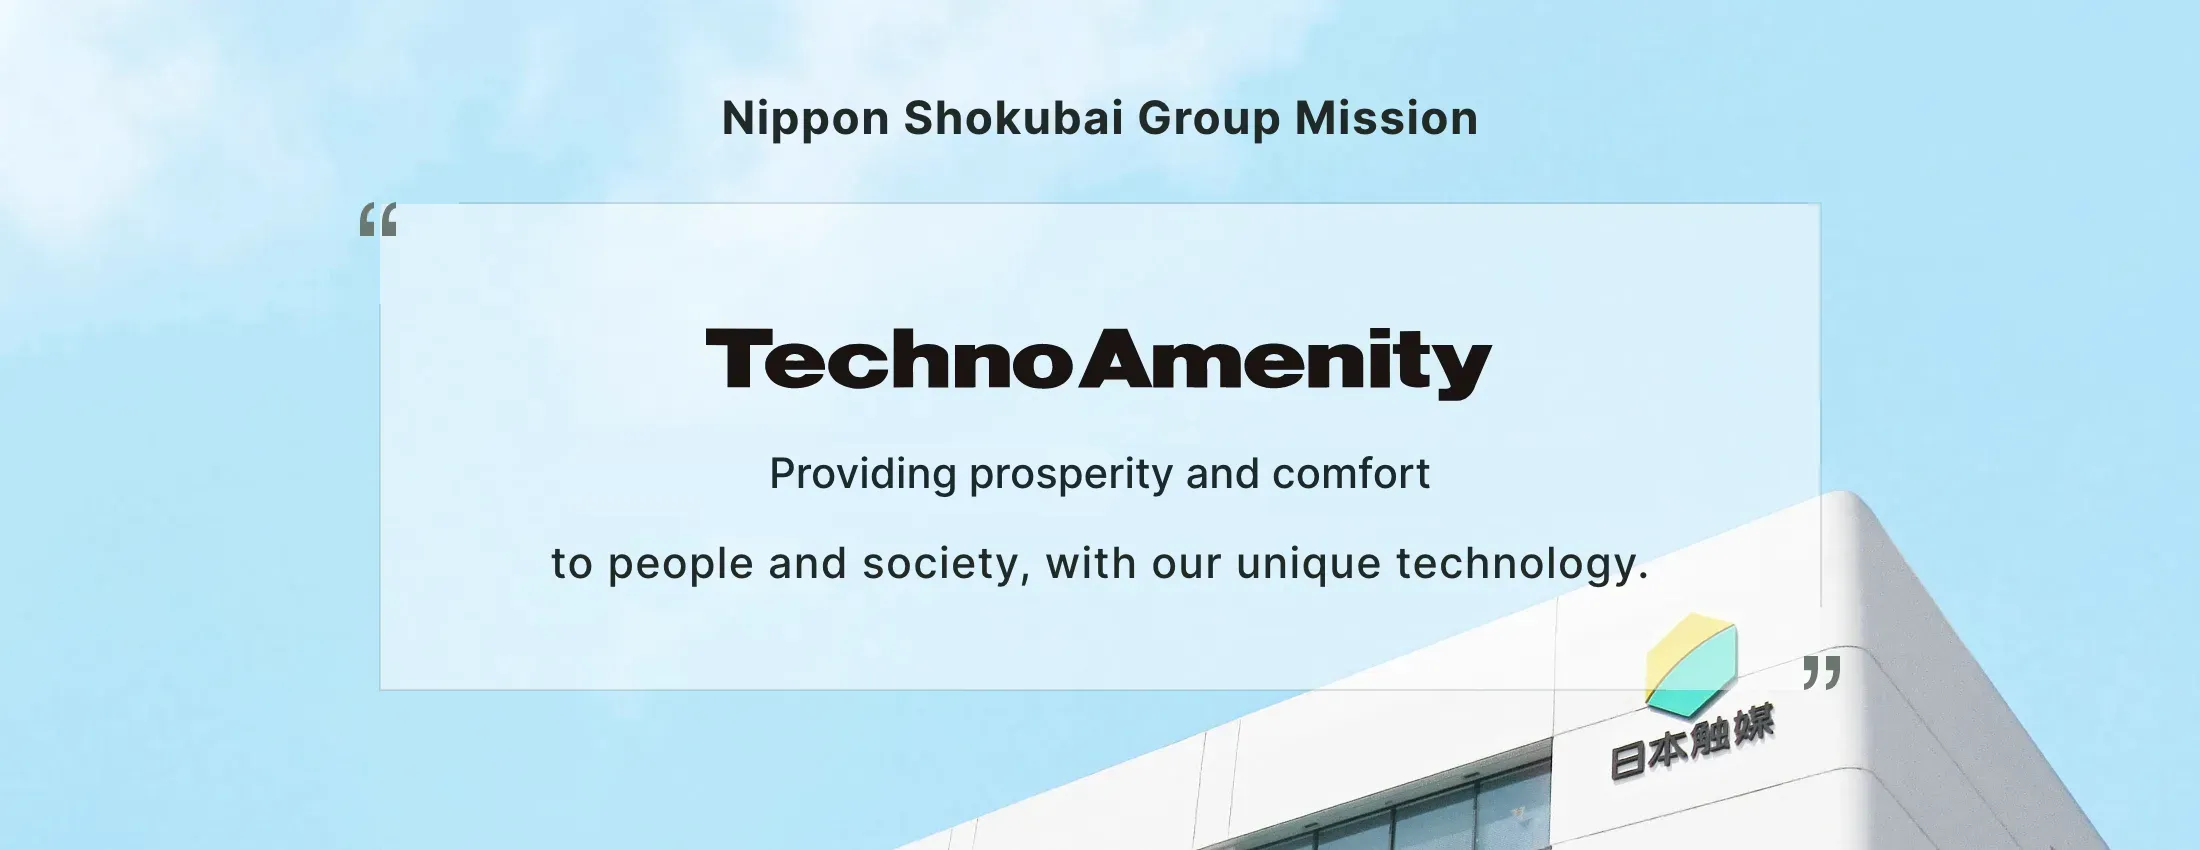 Nippon Shokubai Group Mission Techno Amenity TechnoAmenity Providing affluence and comfort to people and society, with our unique technology.